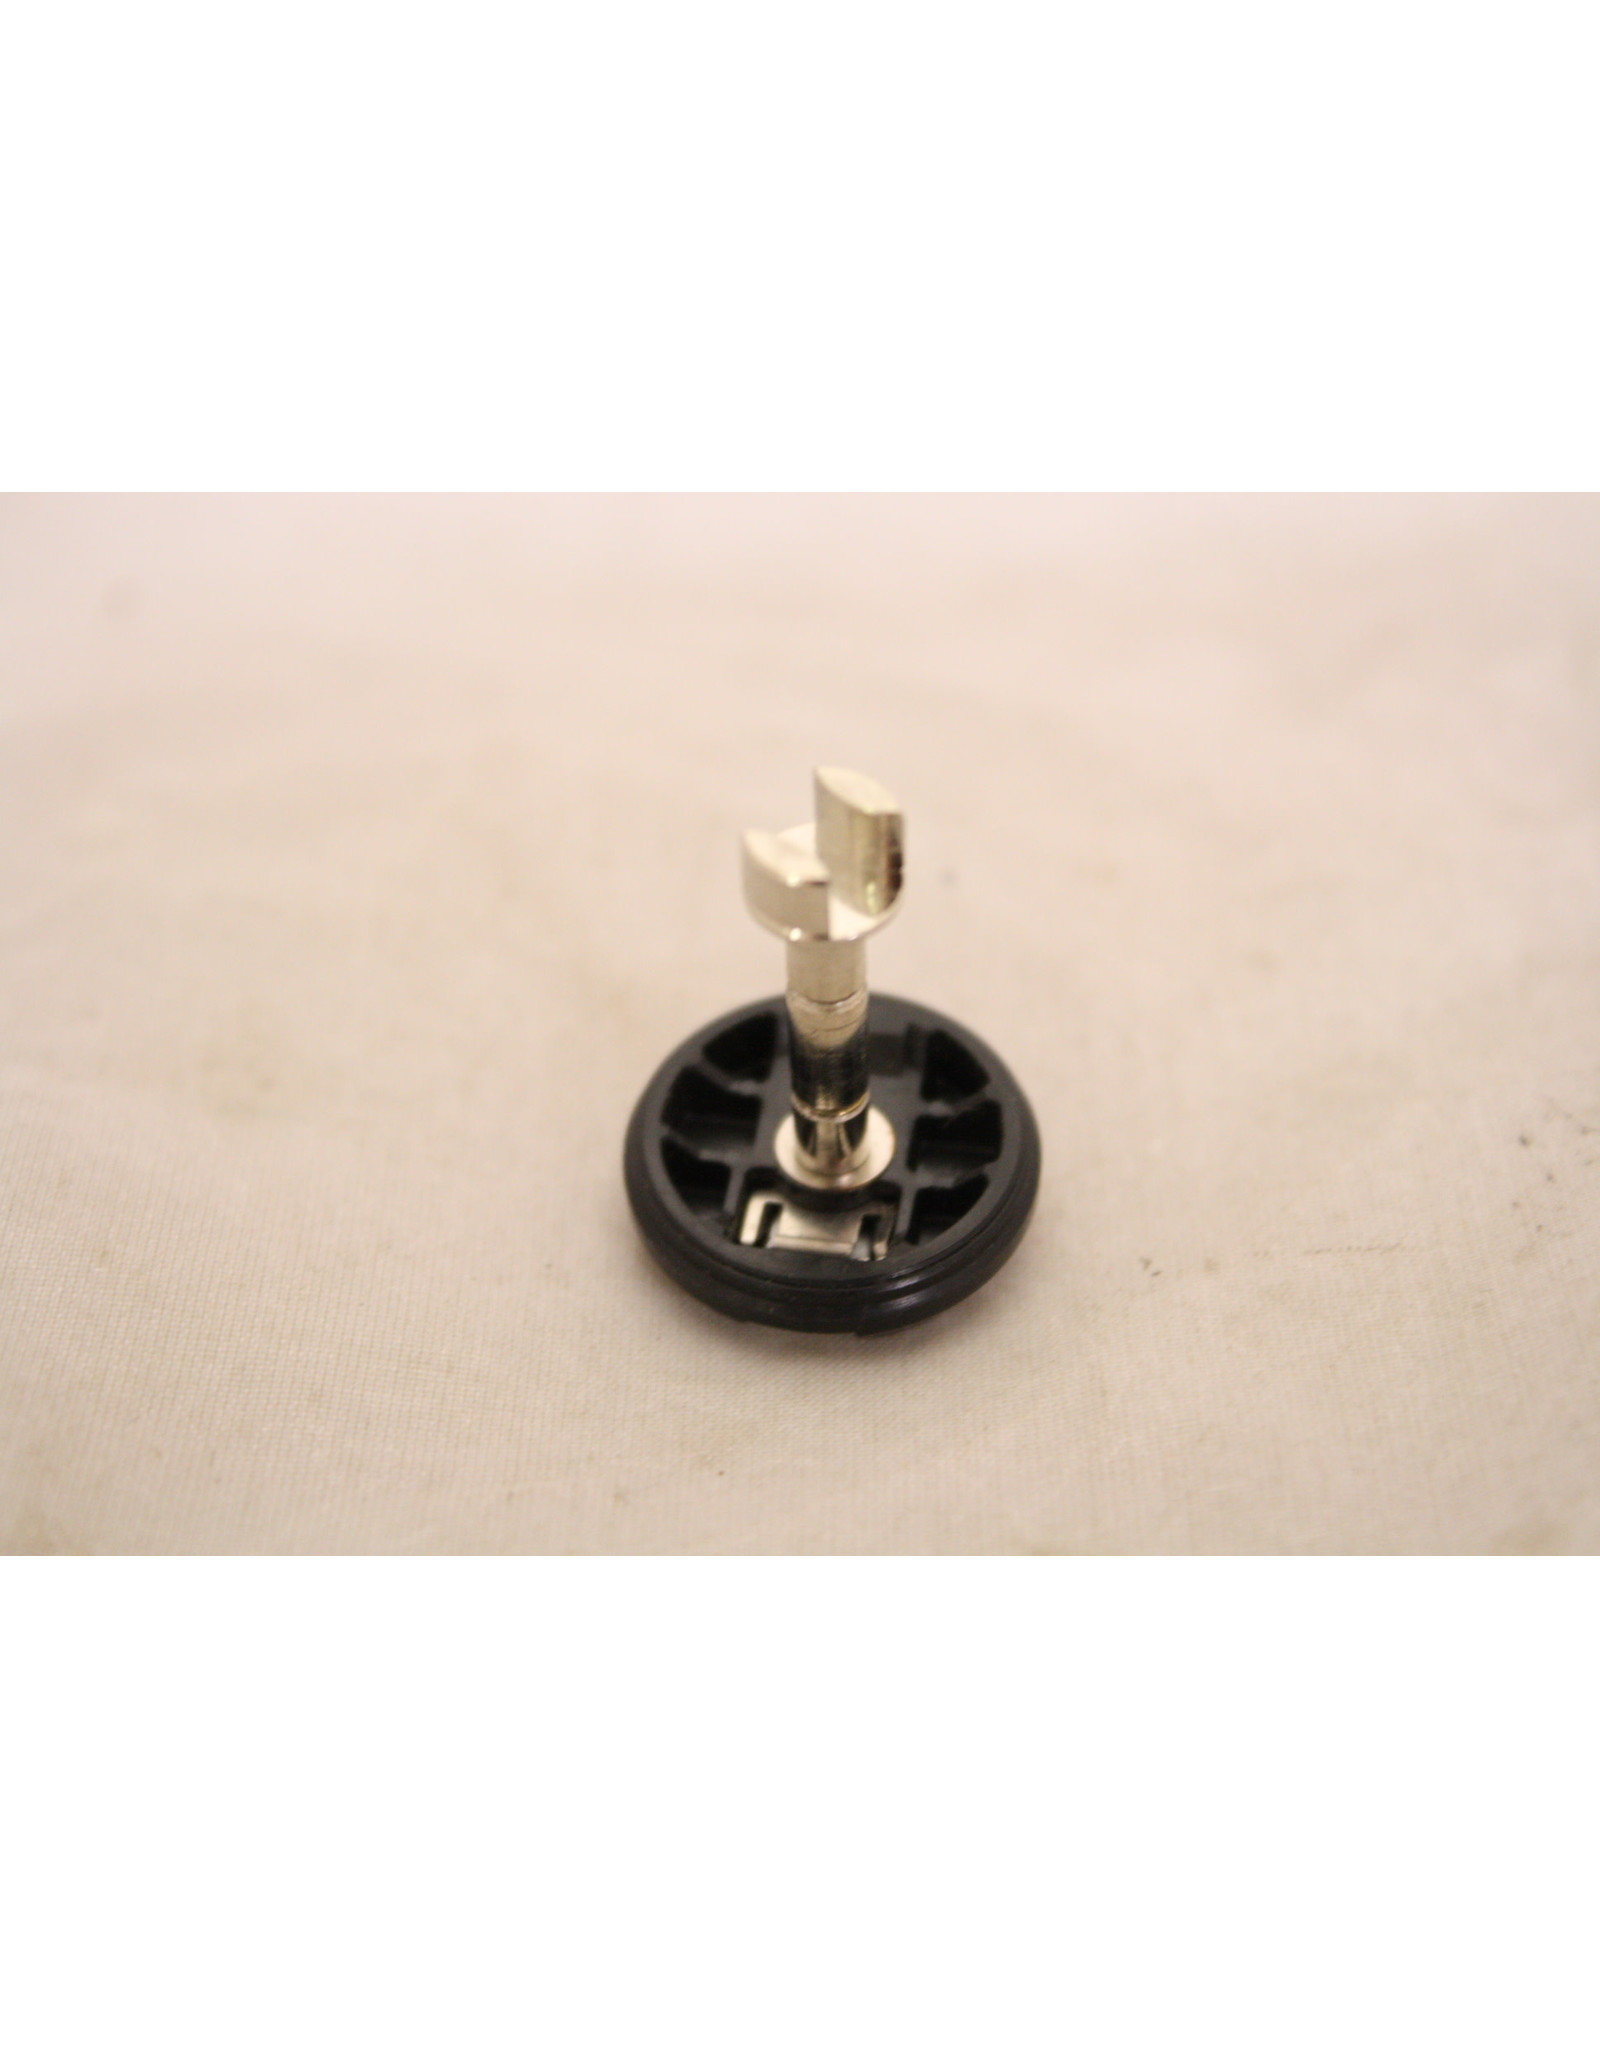 Rewind Knob Assembly for Pentax ME/MG/ME Super